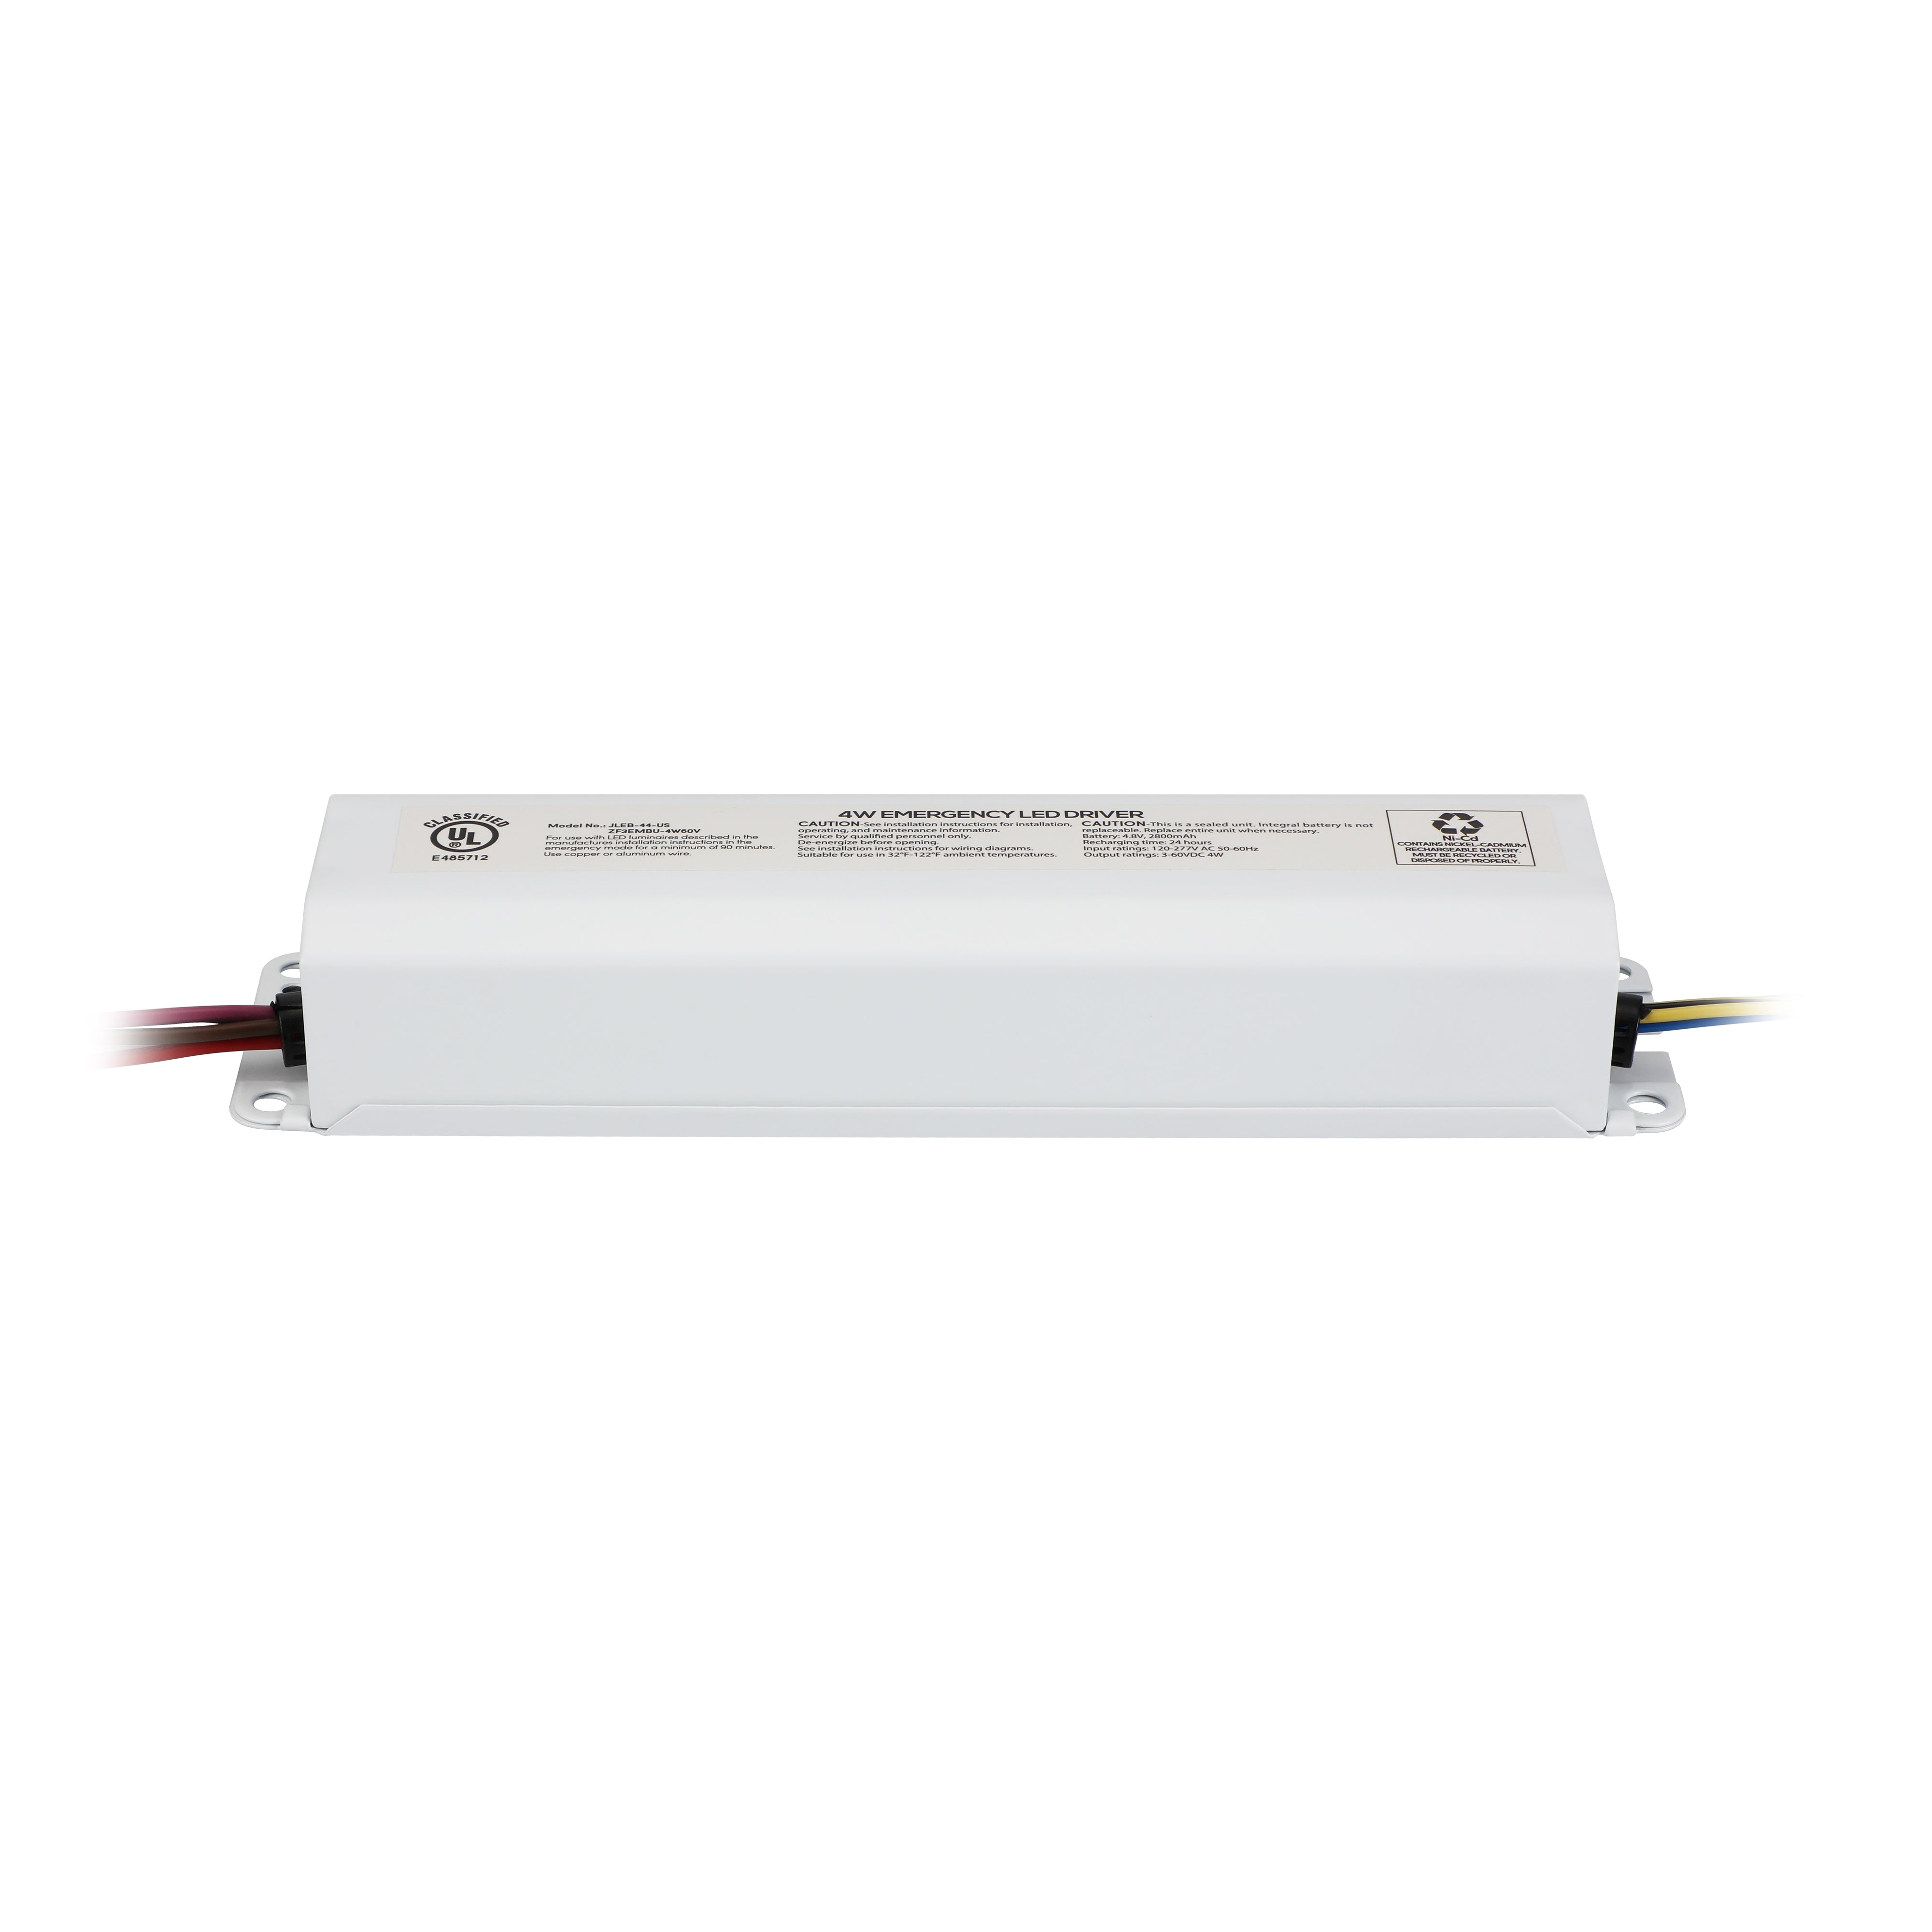 ZF3 Commercial Fixture Emergency Power Supply - 60V 13.5Wh